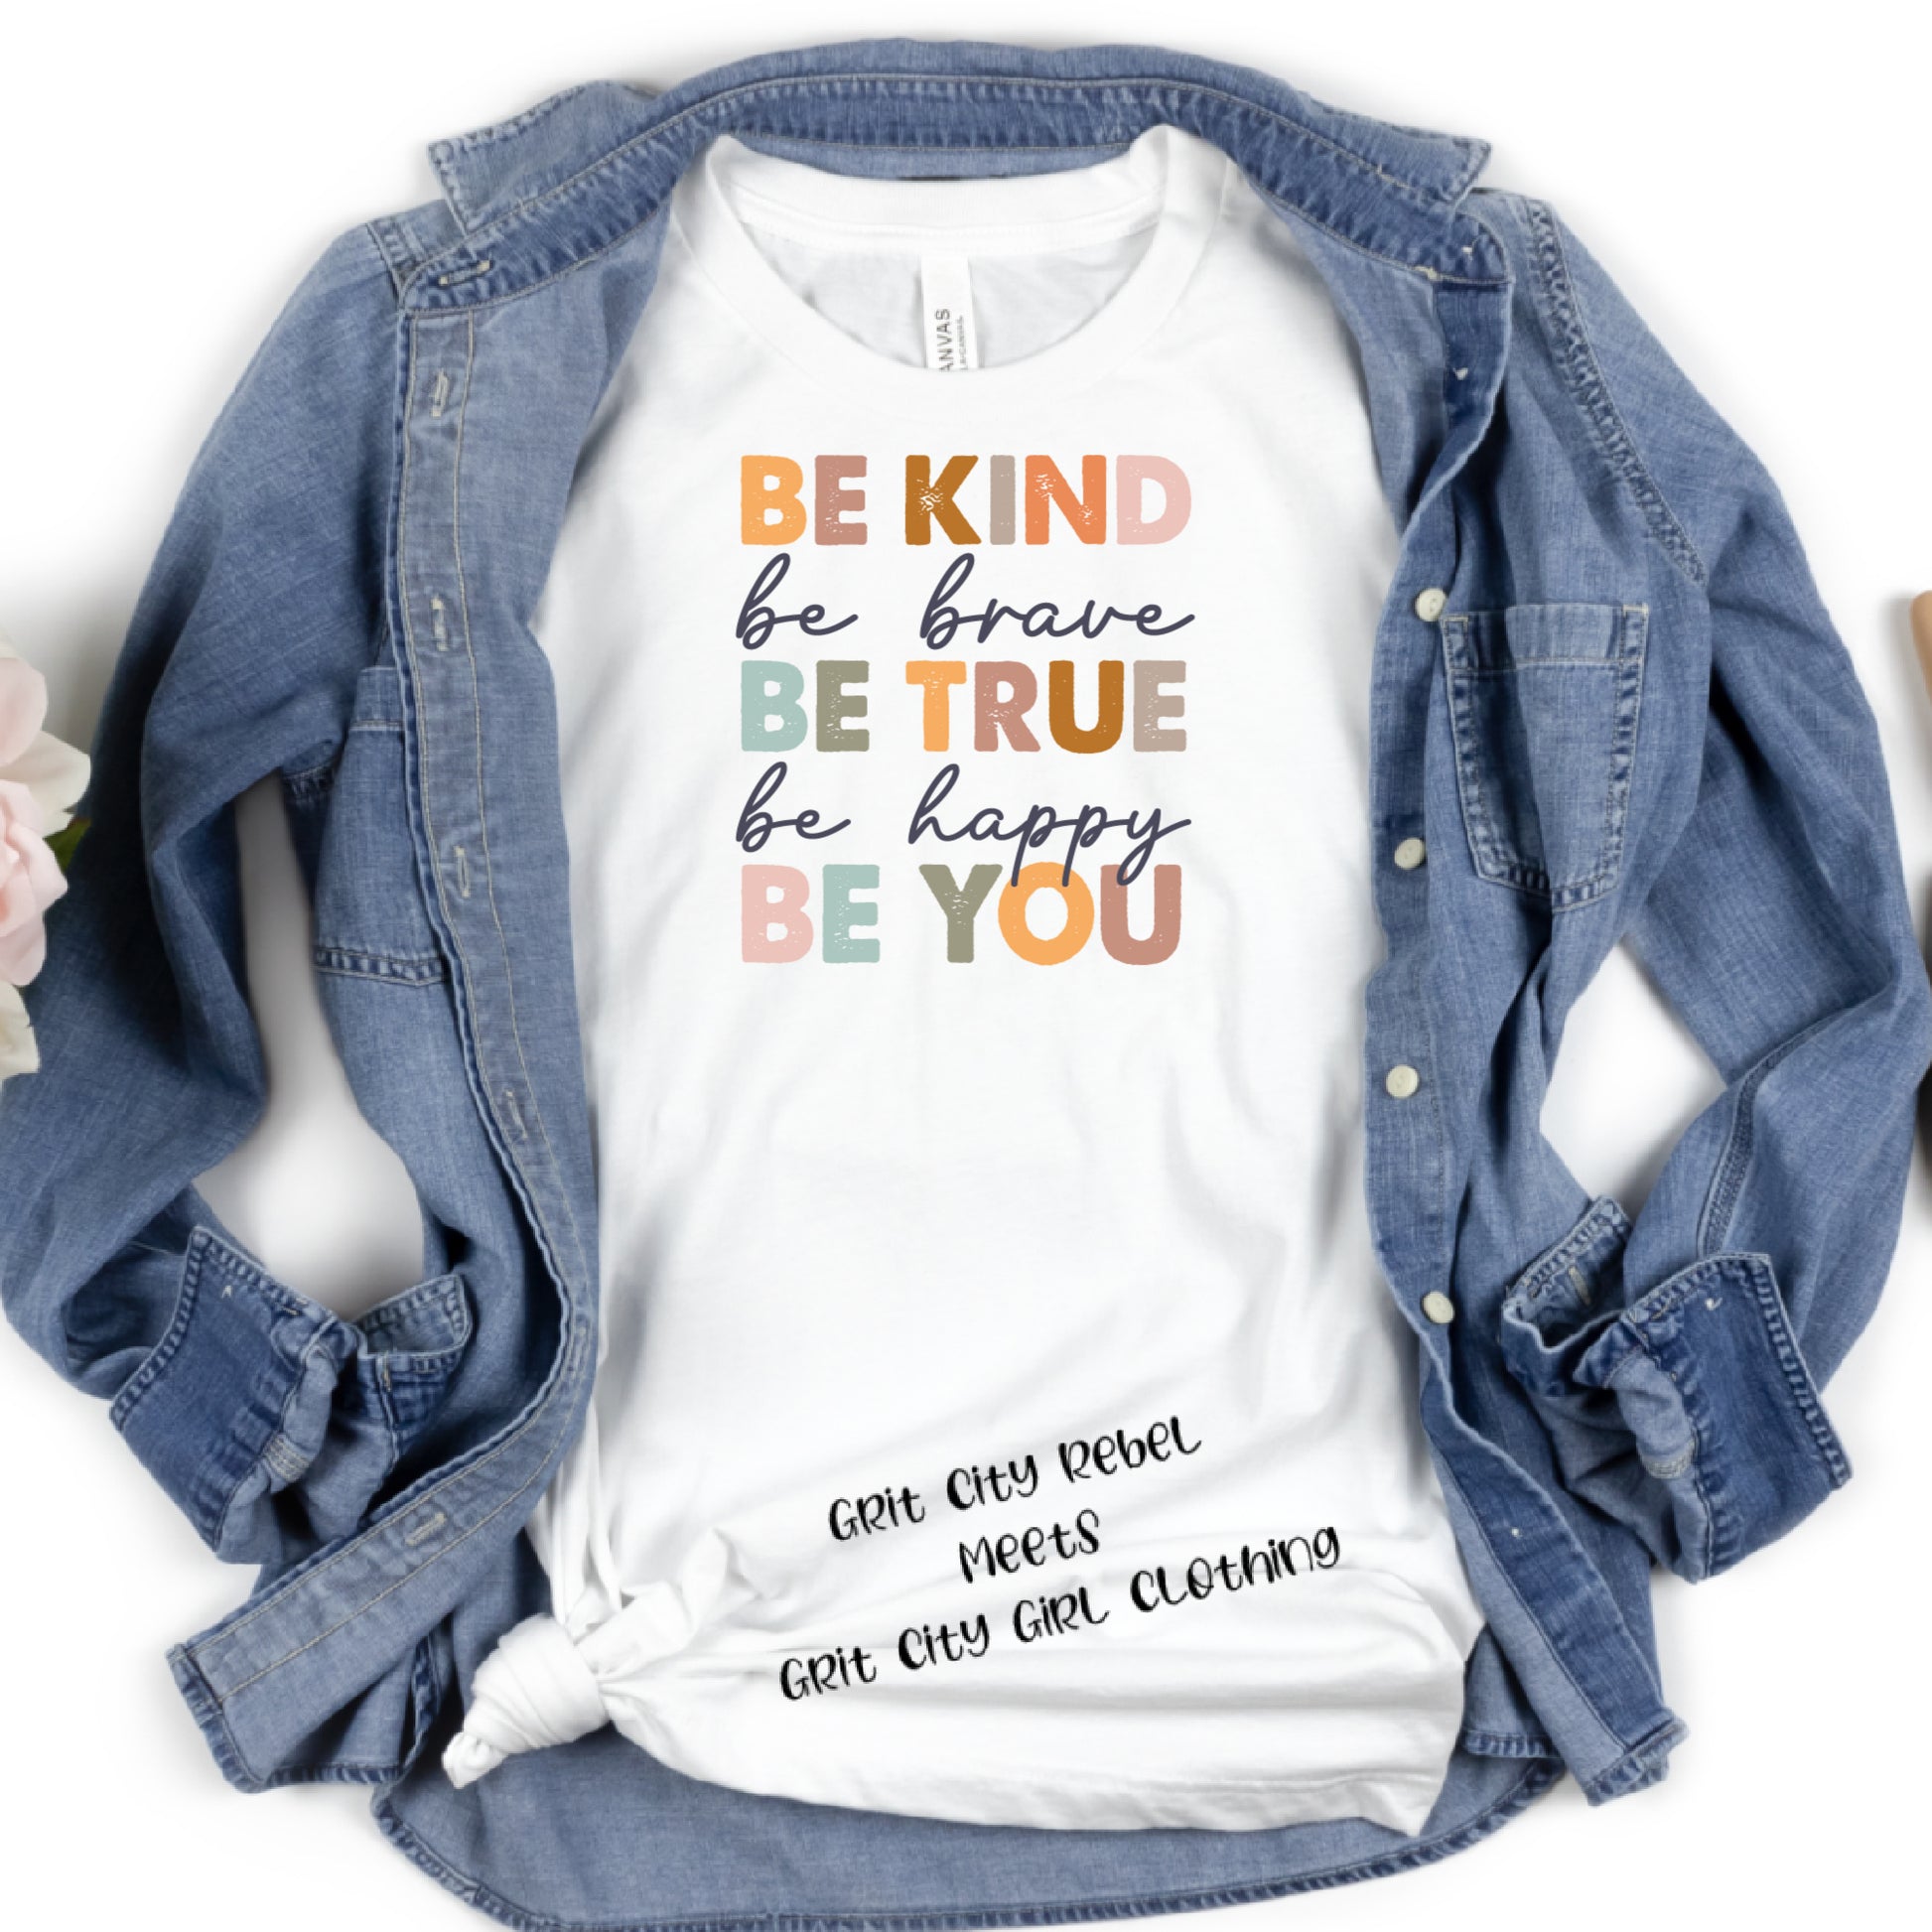 Be Kind Be Brave Be True Be Happy Be You short sleeve unisex short sleeve T-Shirt